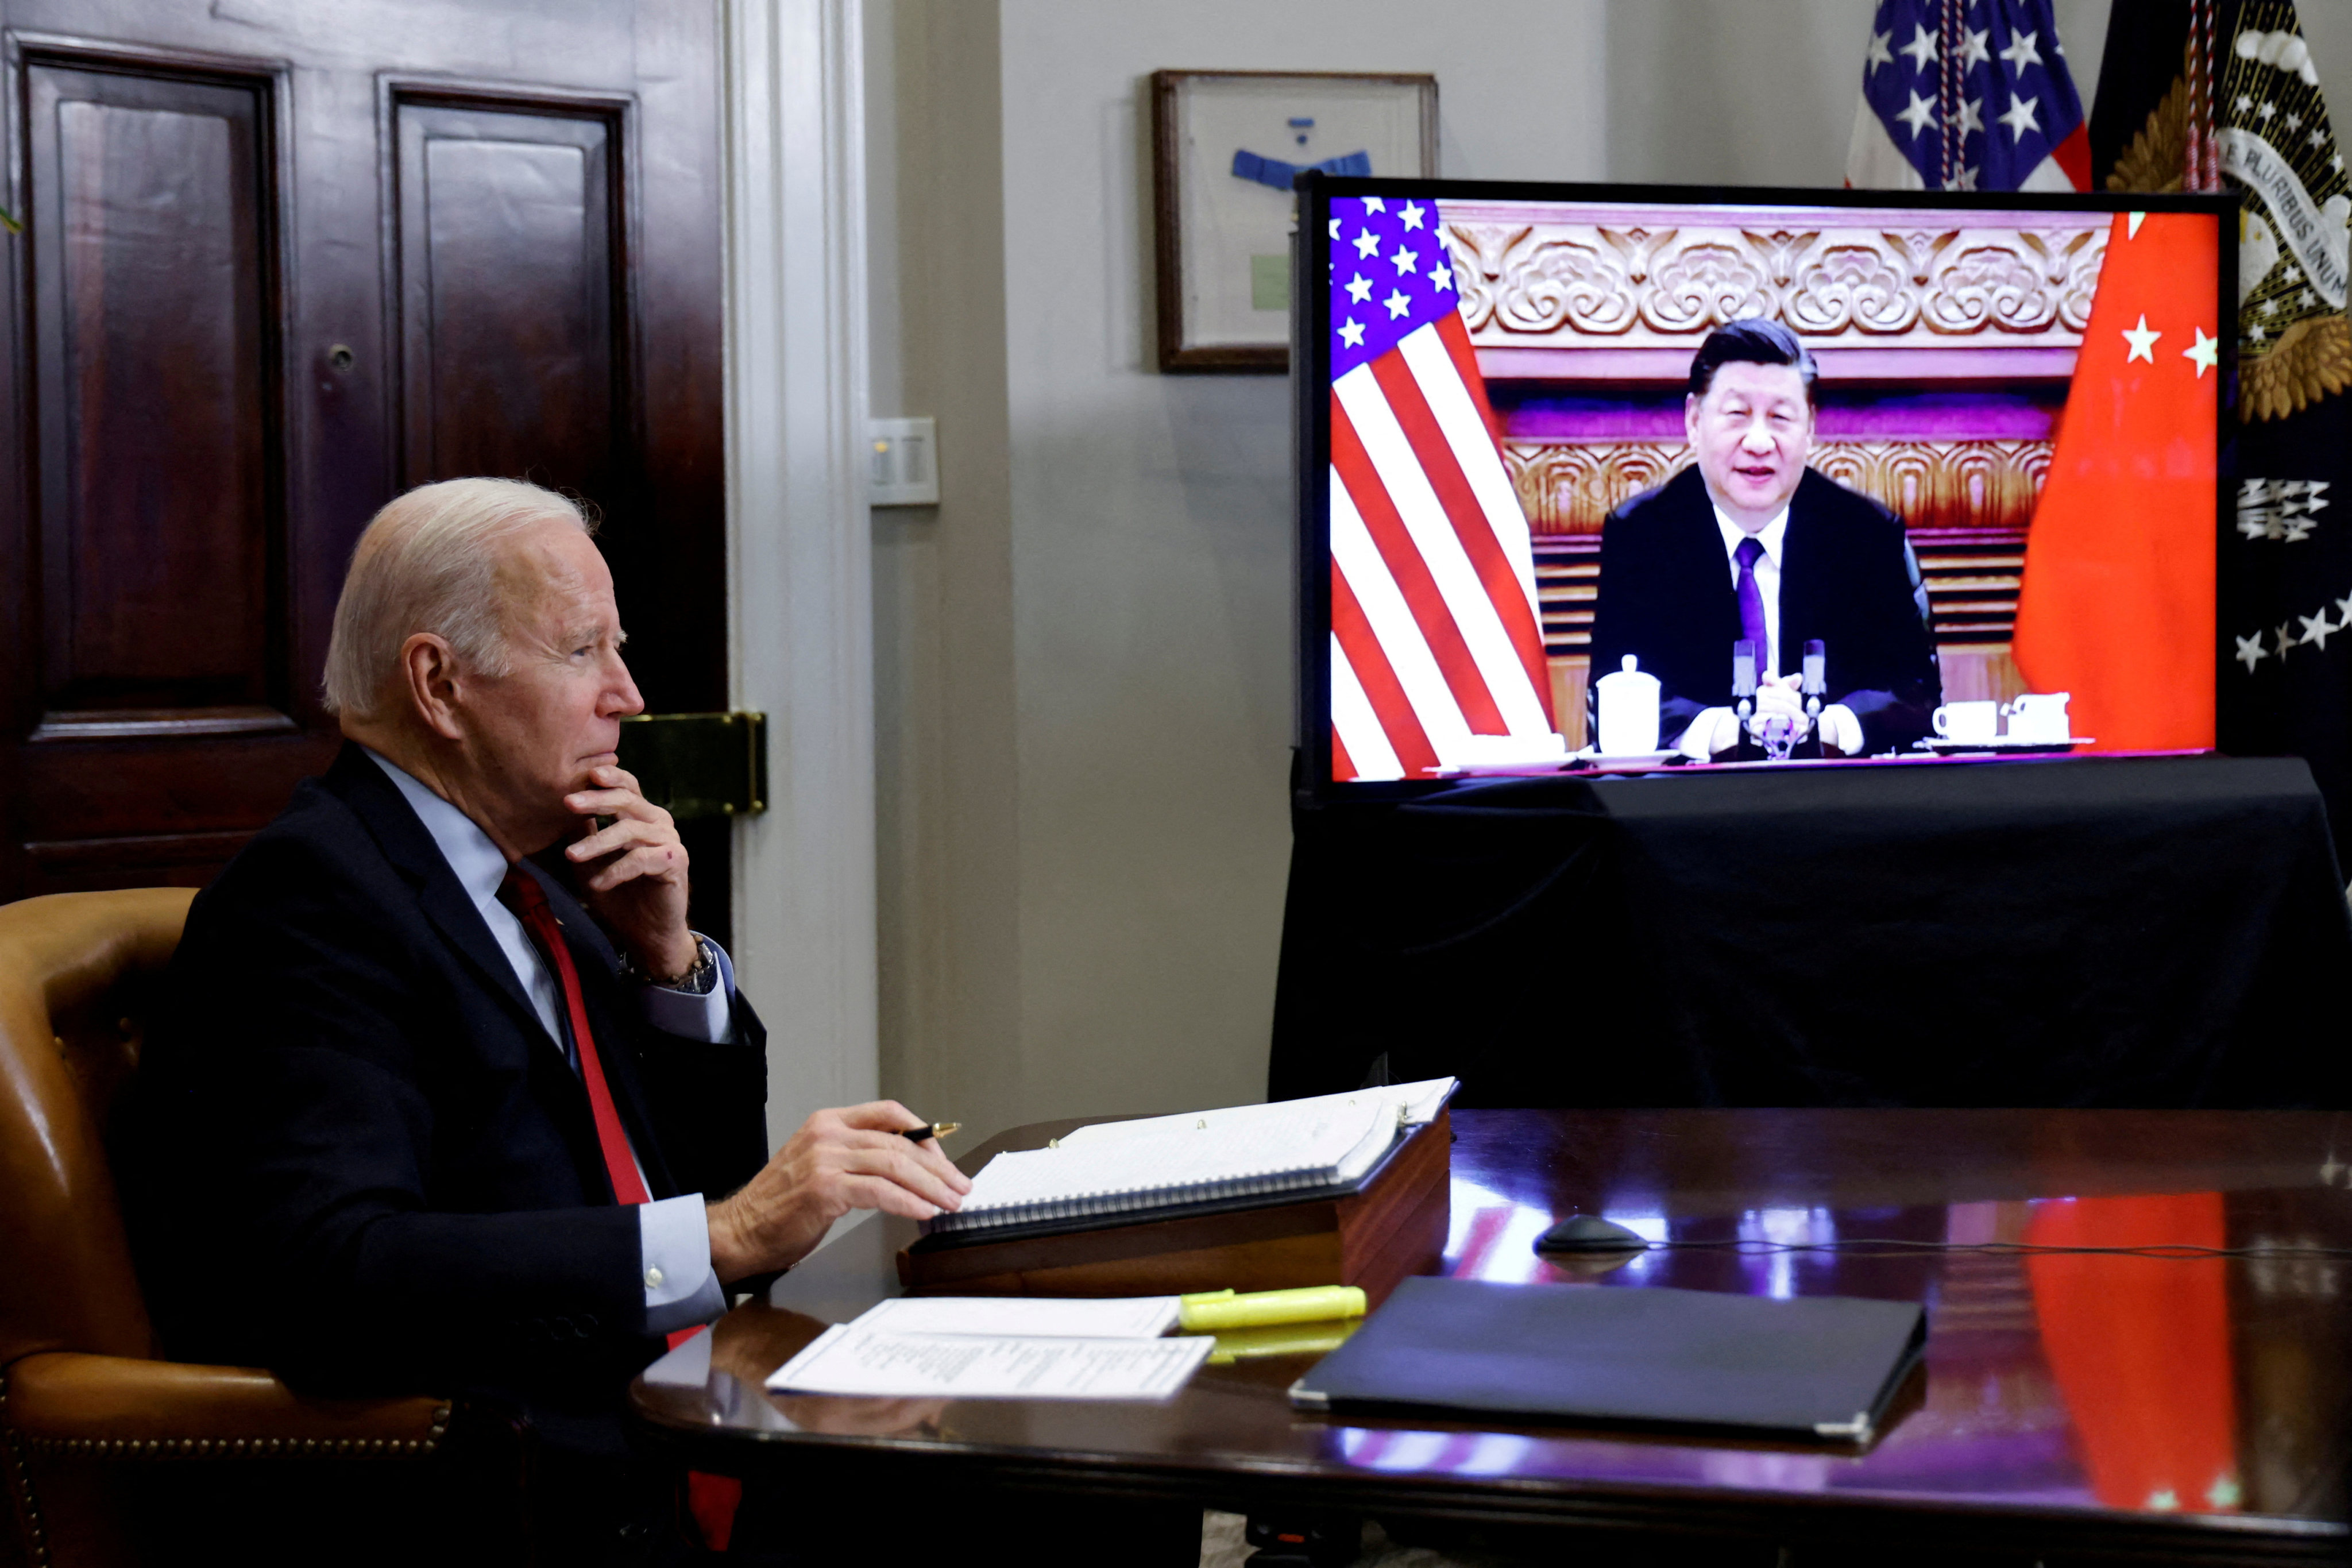 US President Joe Biden holds a virtual meeting with Chinese President Xi Jinping from the White House in Washington on November 15, 2021. Photo: Reuters